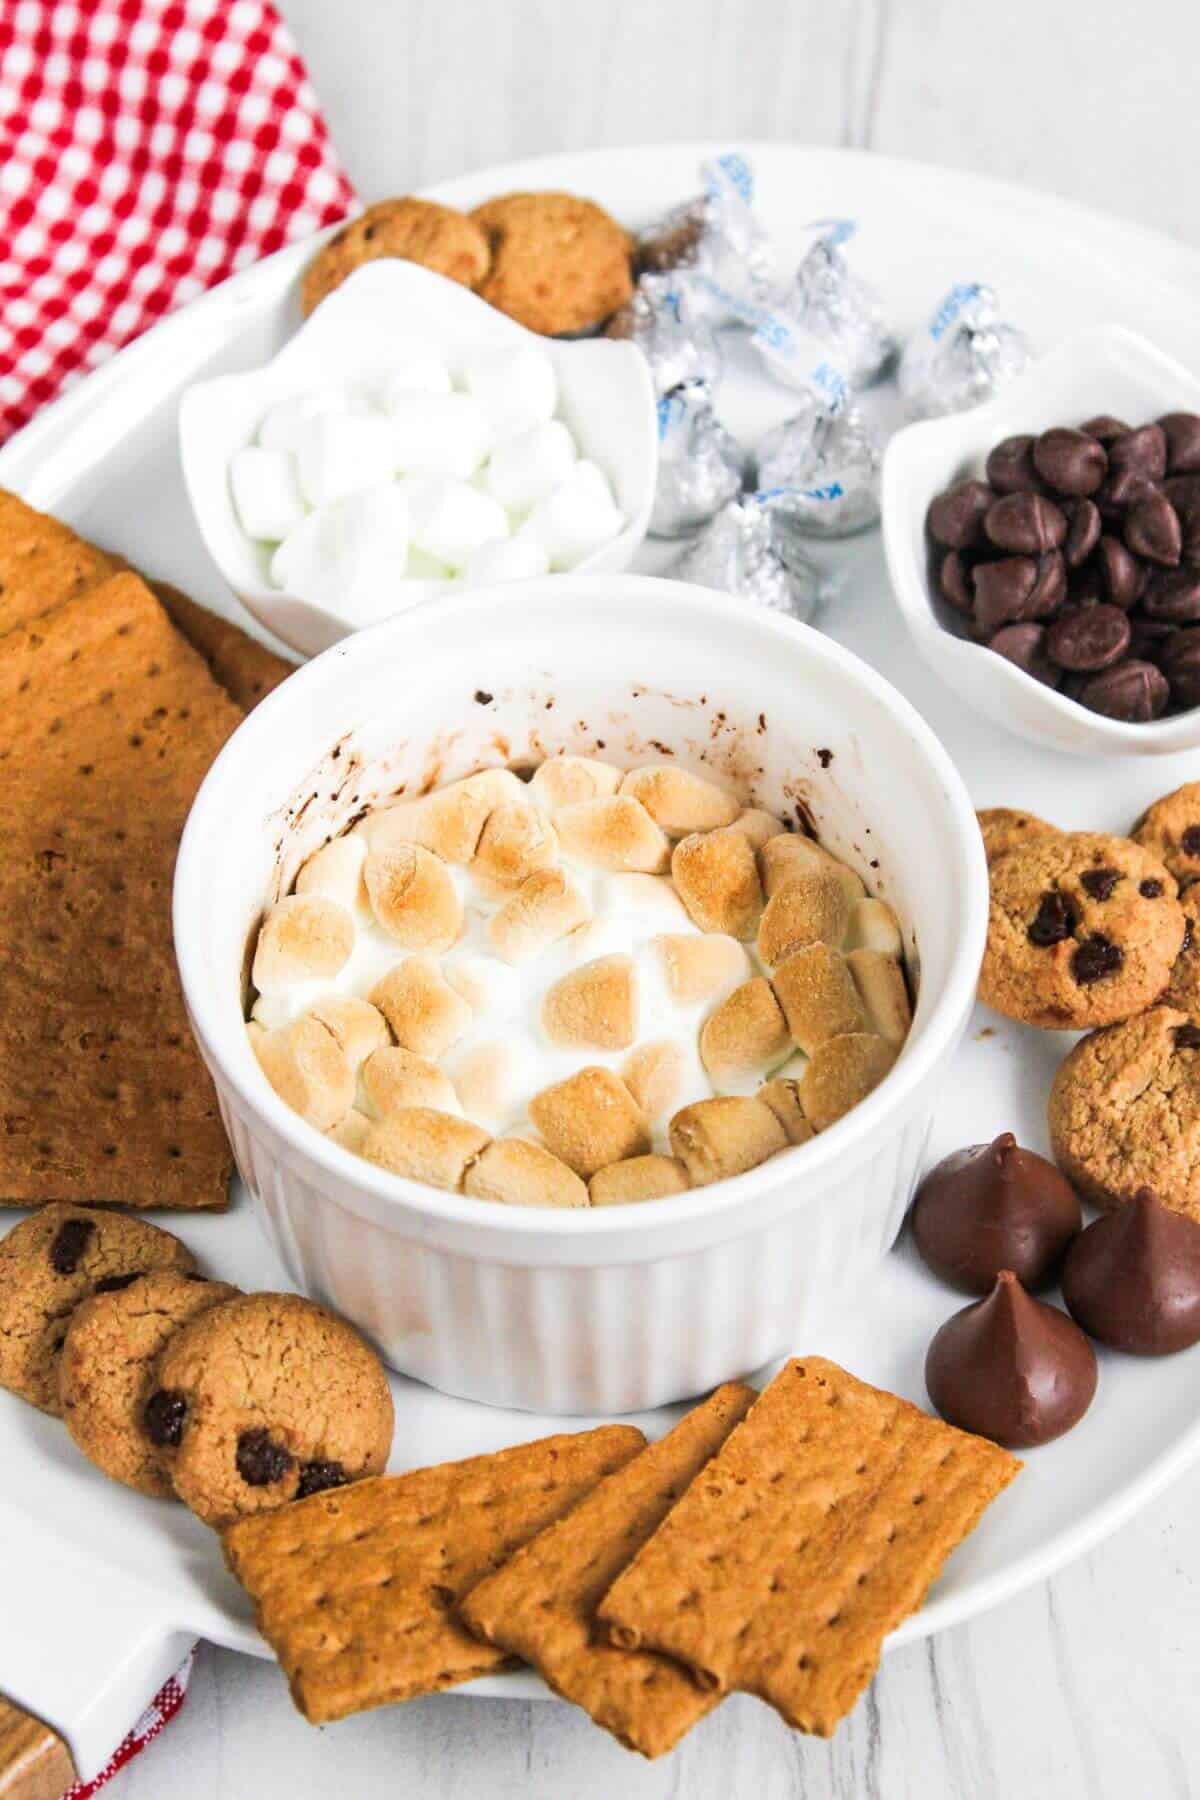 S'mores dip on a plate with cookies and crackers.